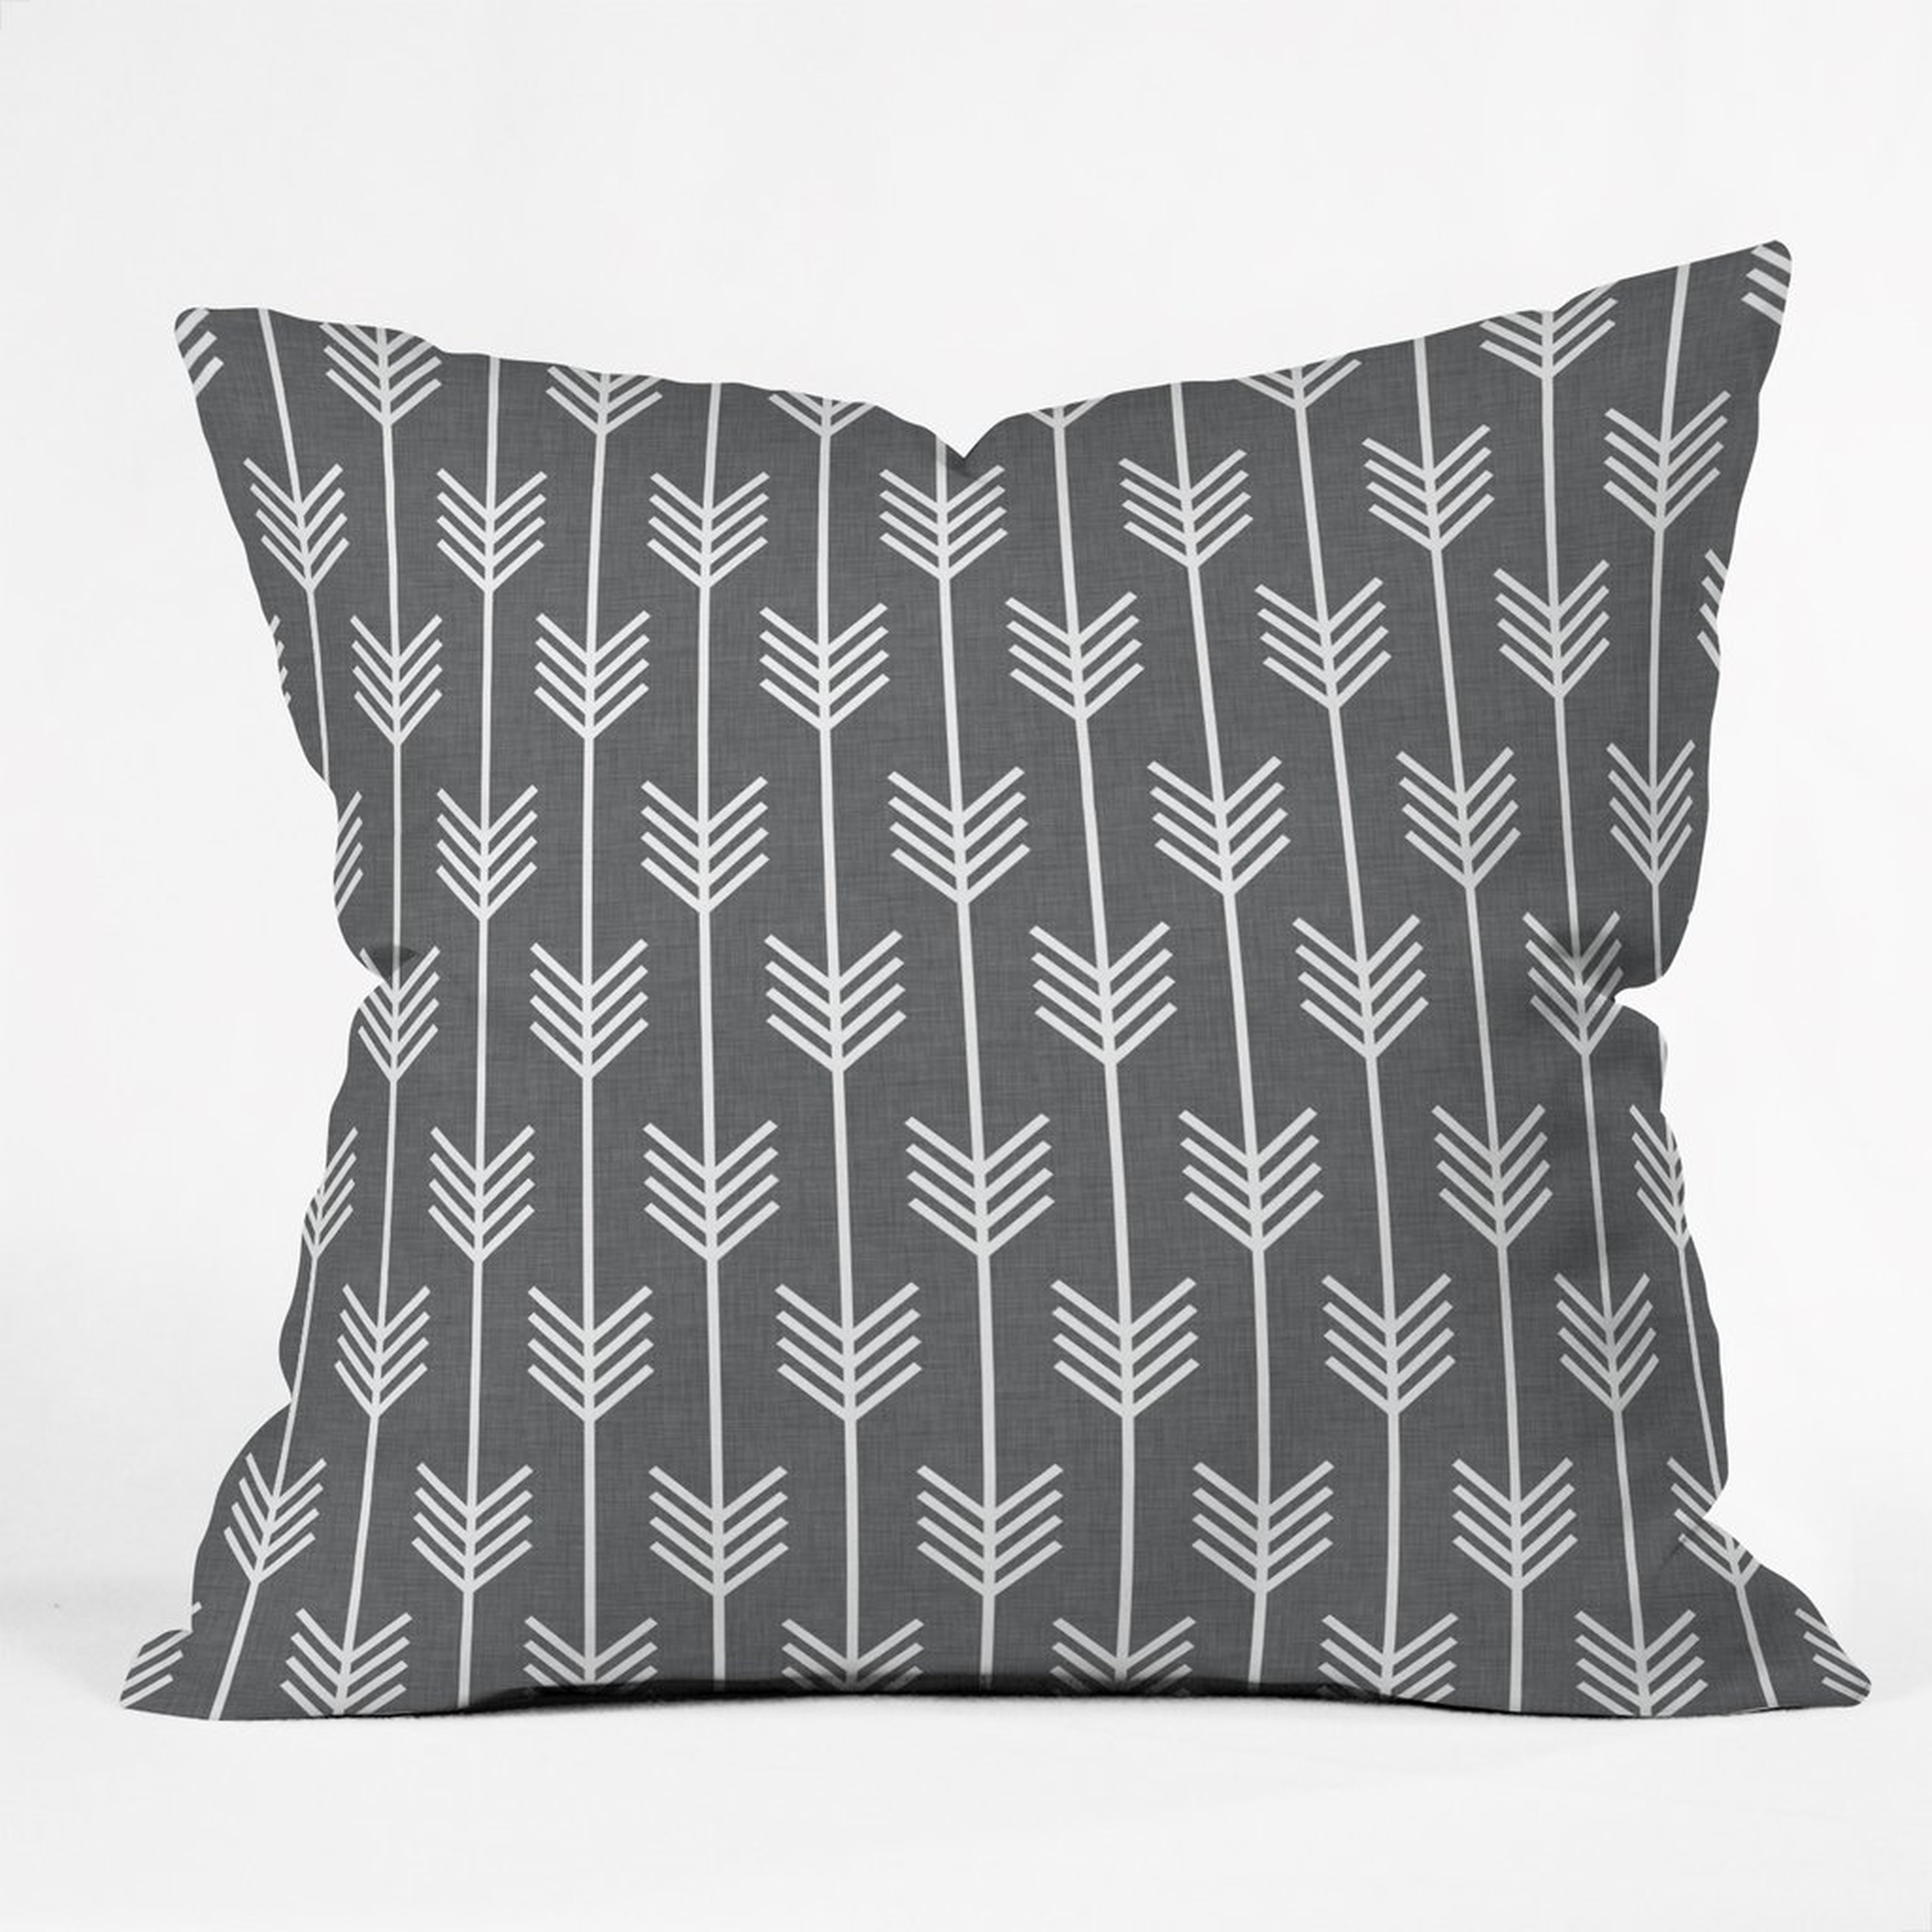 Grey arrows Throw Pillow - insert included 16" - Wander Print Co.